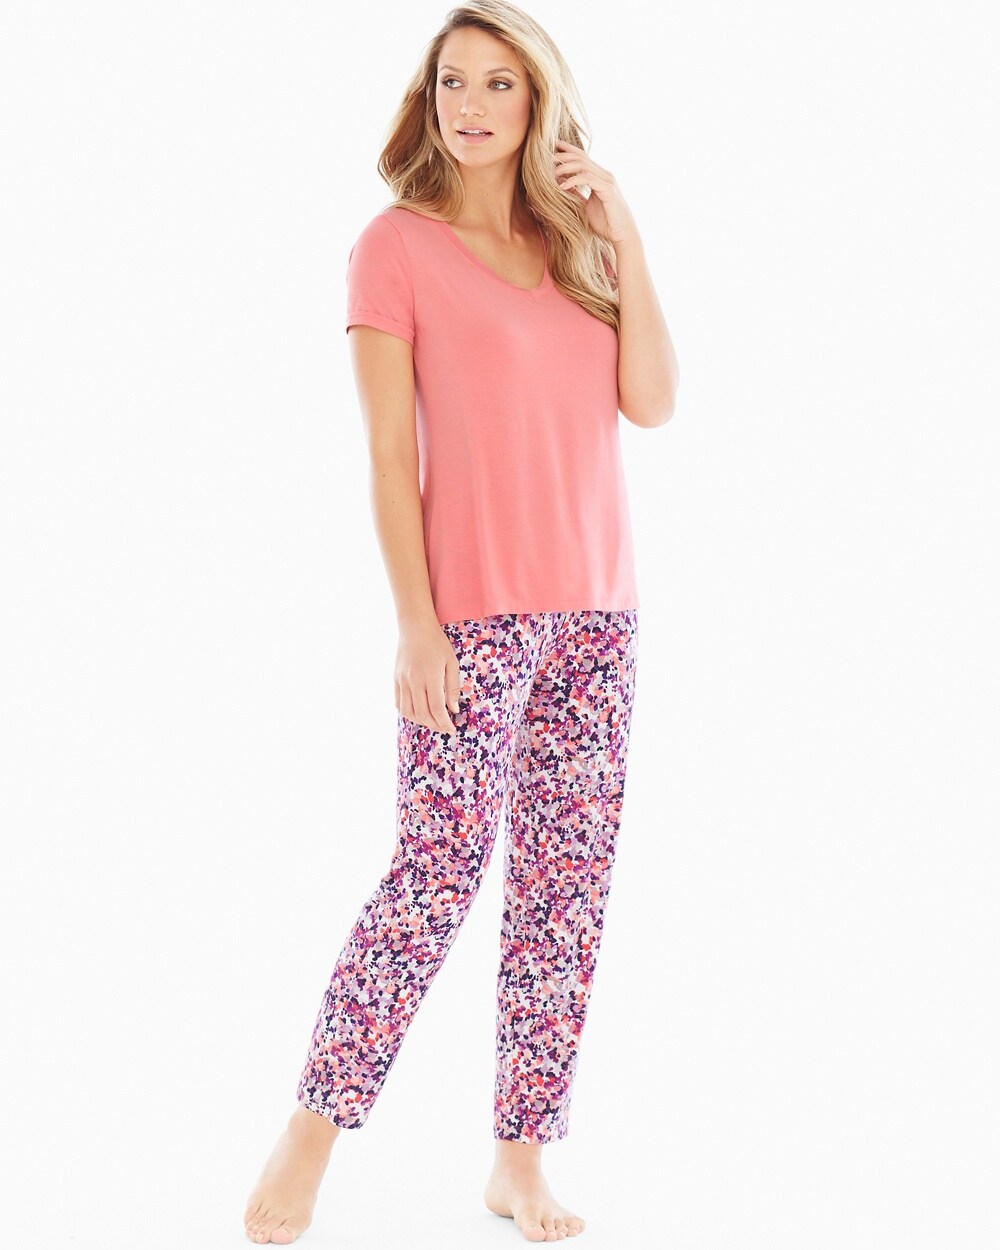 Cool Nights Ankle Pants Pajama Set Speckled Coral Hype